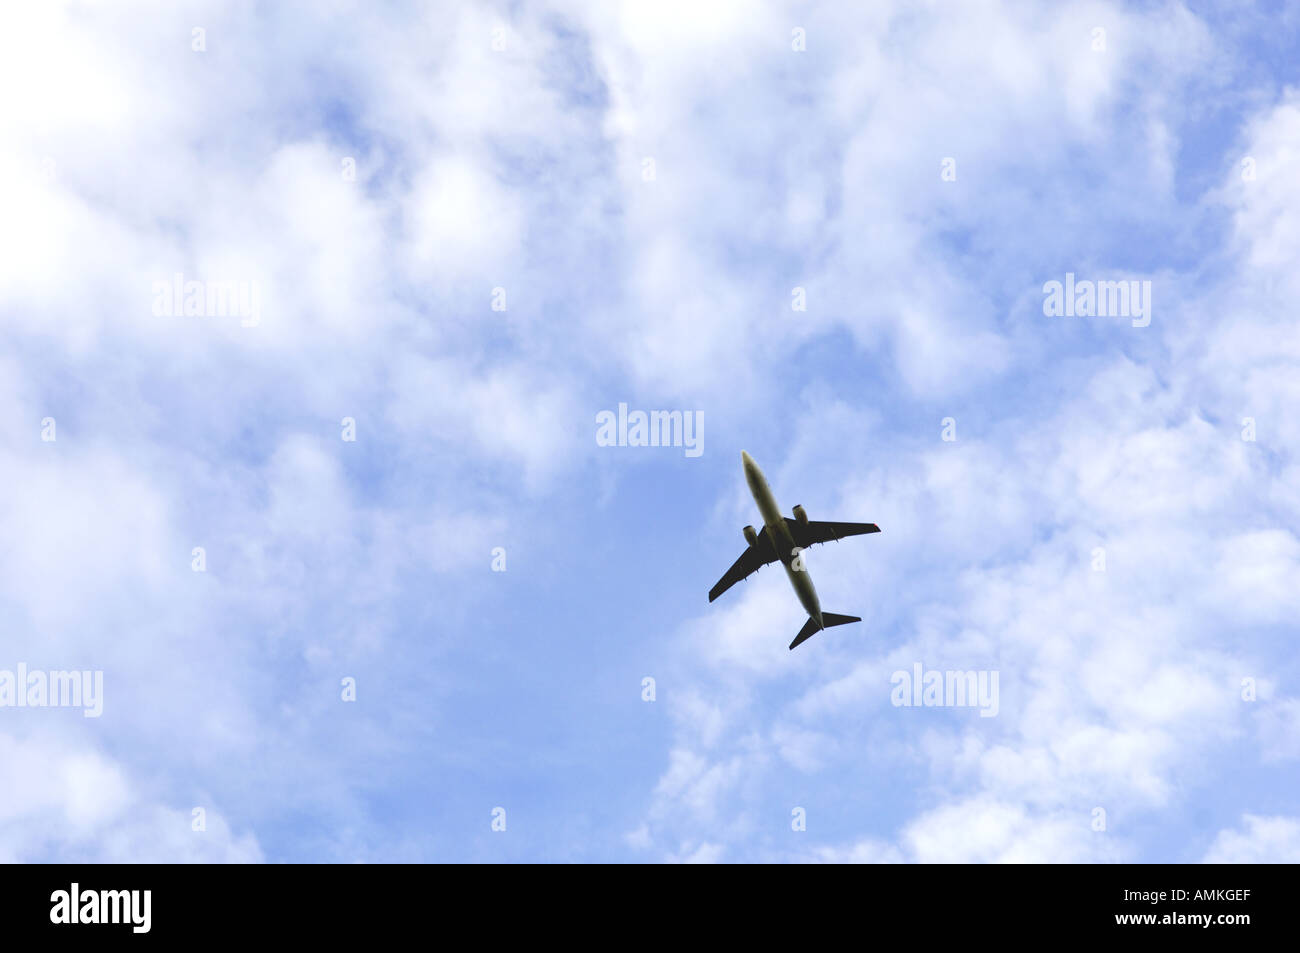 aircraft airplane jet aeroplane passenger airliner airline flying in sky seen from below Stock Photo